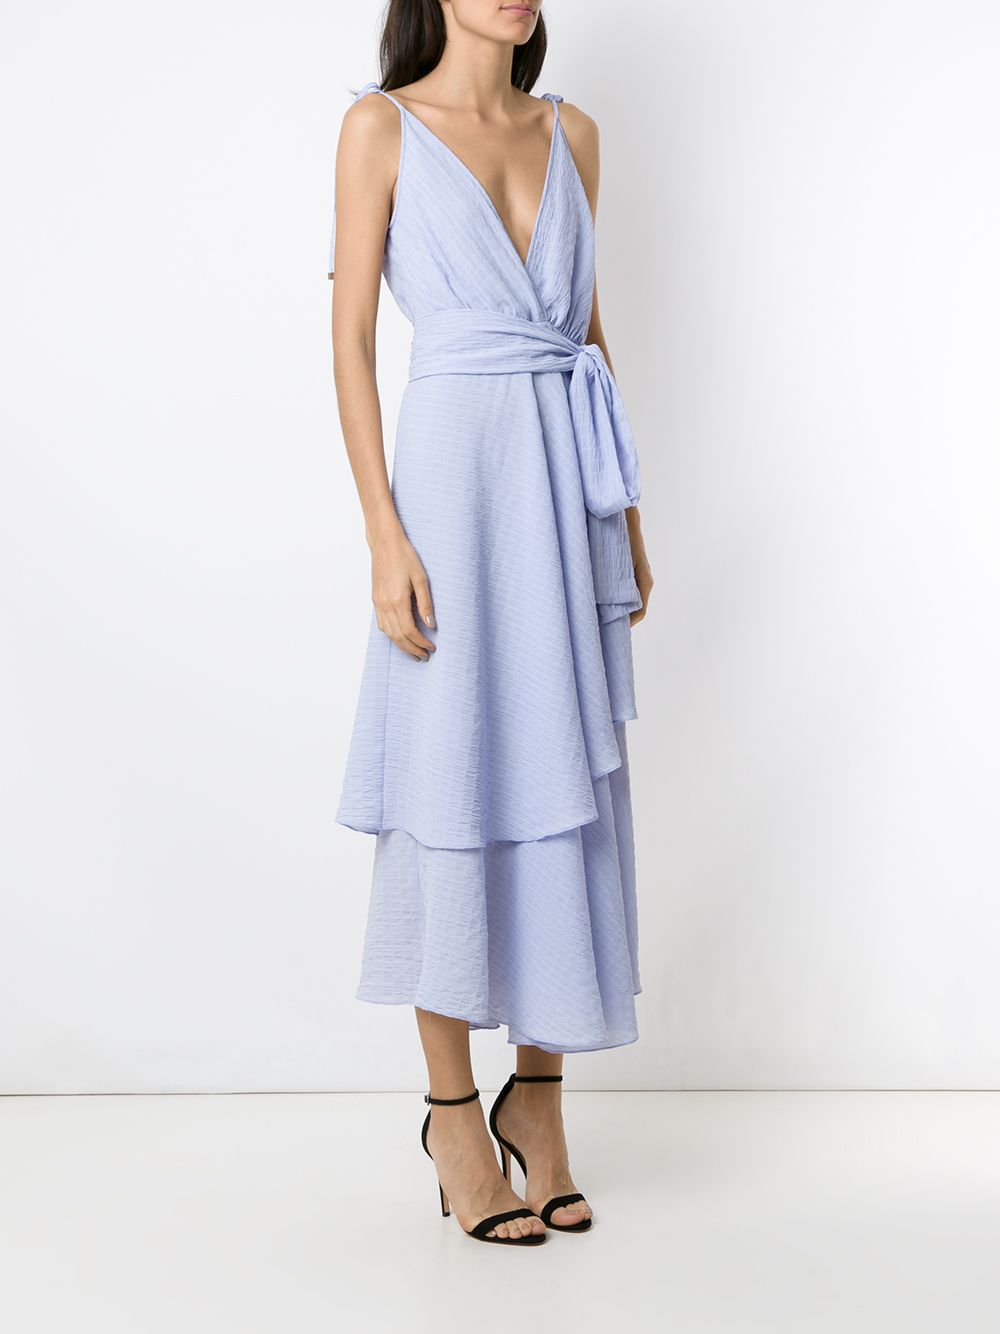 Shop Olympiah Begonia maxi dress with Express Delivery - FARFETCH